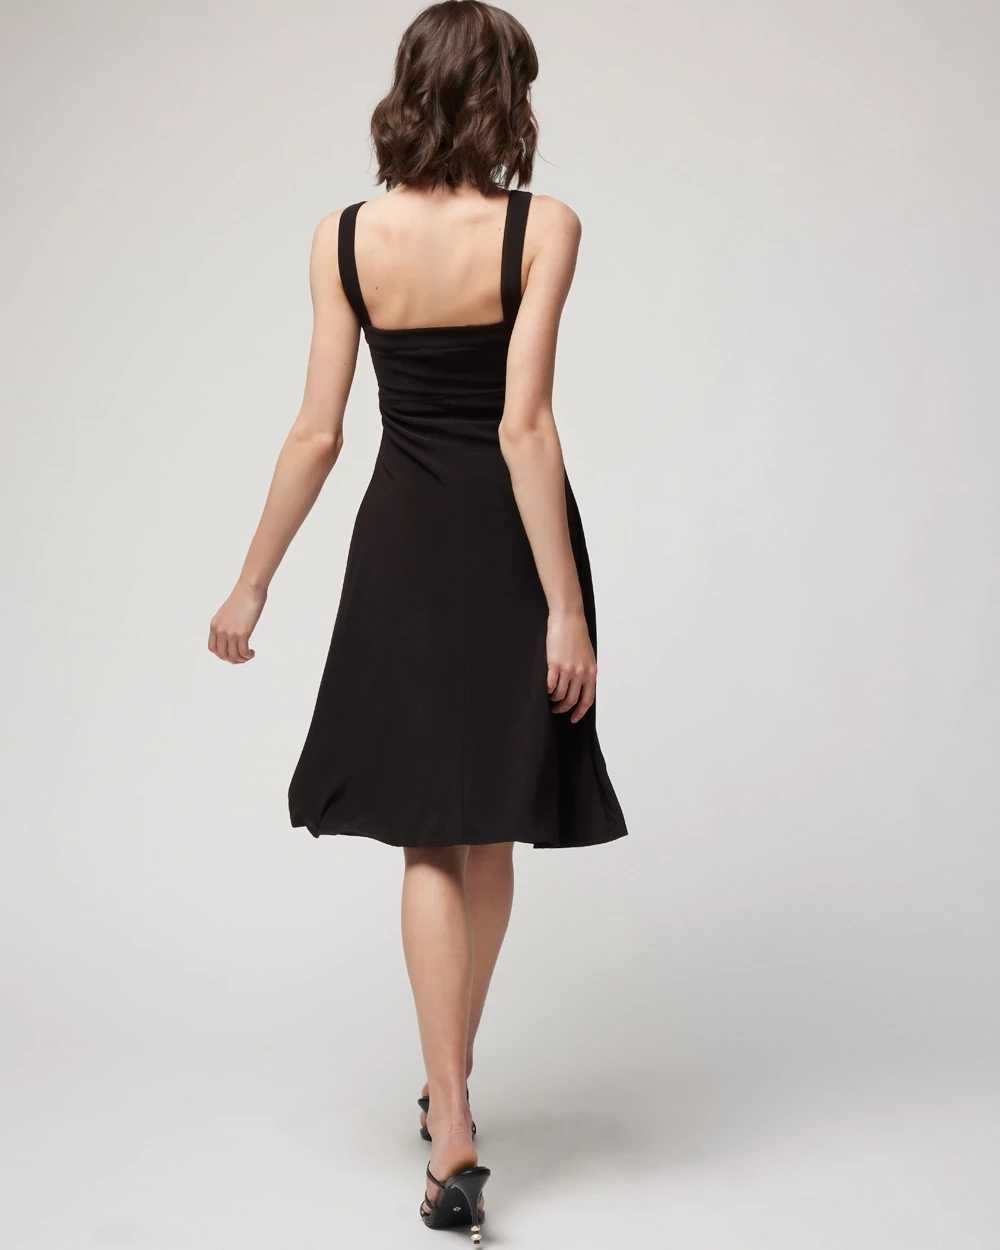 Matte Jersey Sweetheart Twist Front Dress click to view larger image.